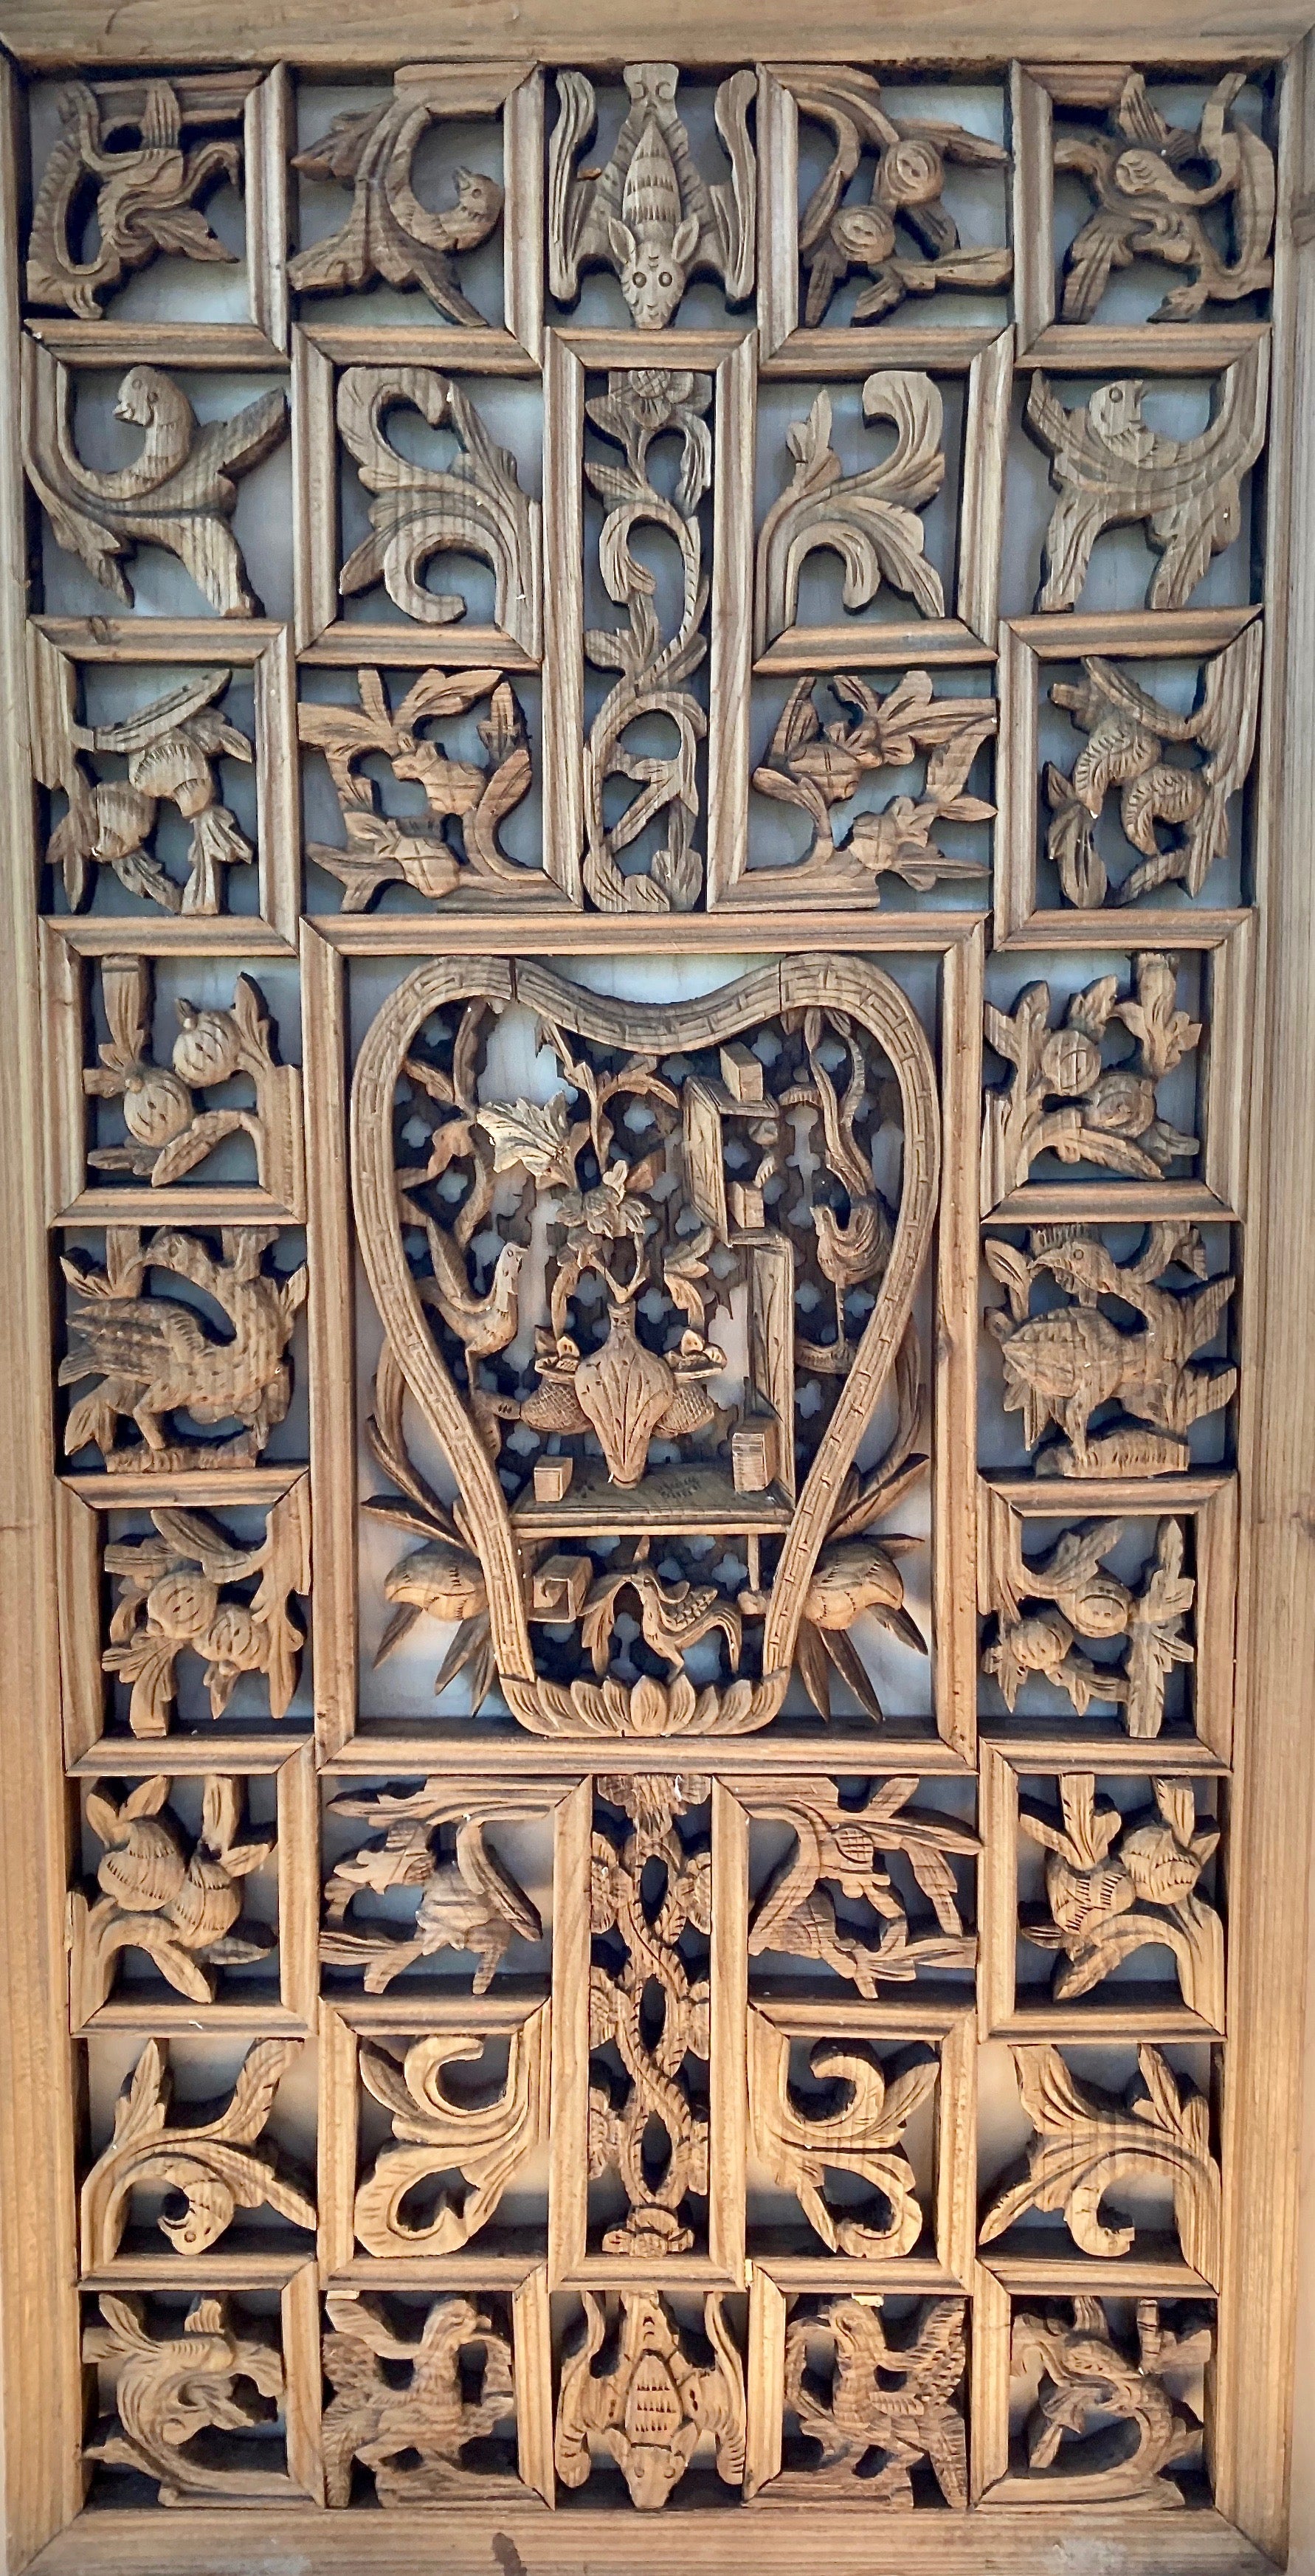 This Chinese decorative lattice work panel, has pear shaped center carving with floral, beast, personage motif. Surrounding small rectangular lattices in symbolic floral and bat motif carvings.